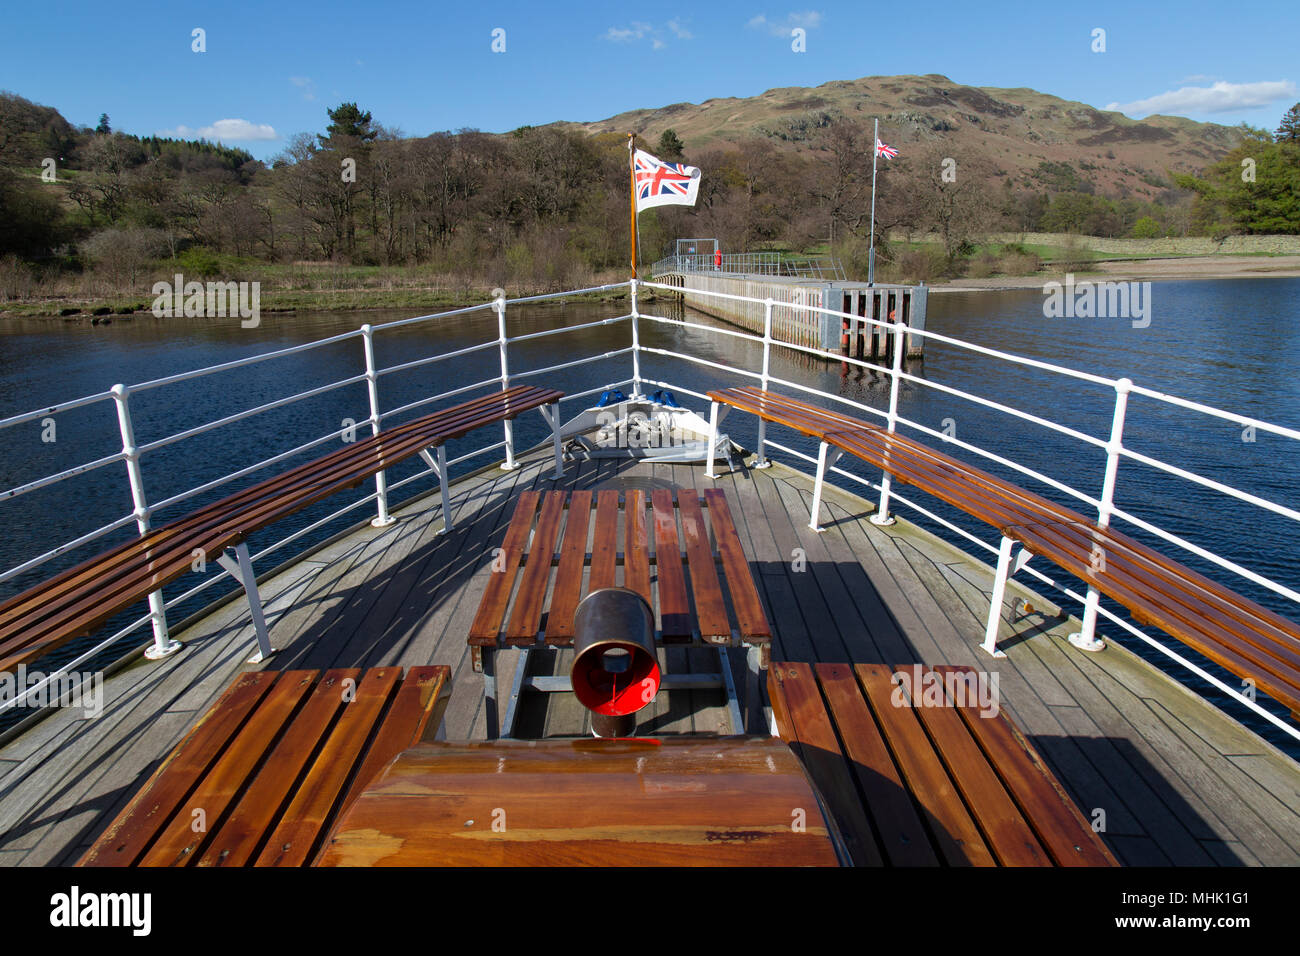 View from the front of the MV Western Belle, an Ullswater steamer in the Lake District National Park in England. Built in 1935. Stock Photo